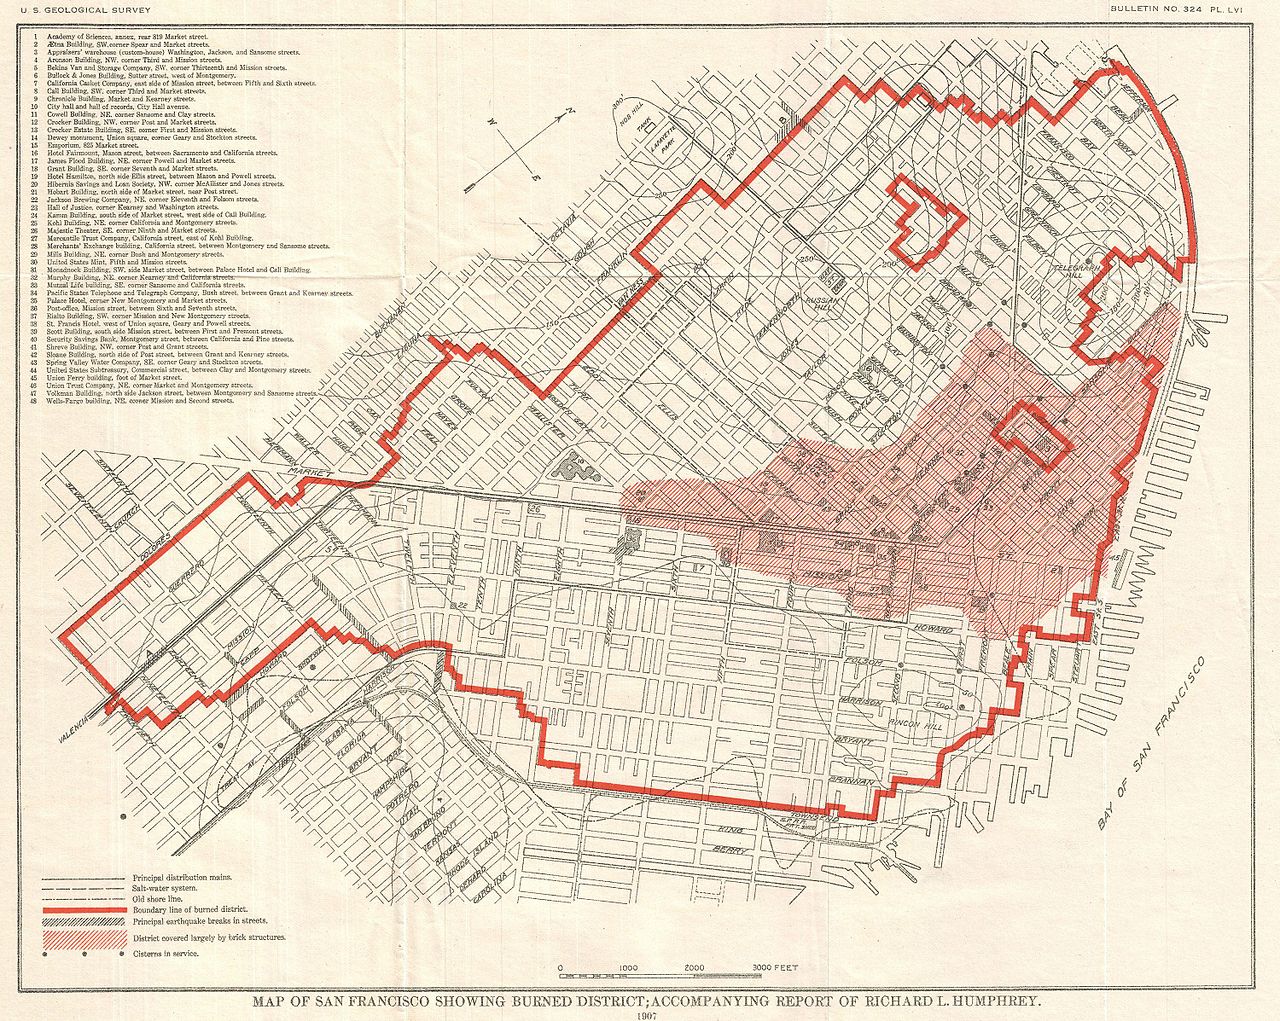 . A map of San Francisco from a U.S. Geological Society publication showing the extent of the fire from the 1906 earthquake and fire. (“The San Francisco Earthquake and Fire of April 18, 1906,” U.S. Geological Survey, 1907)